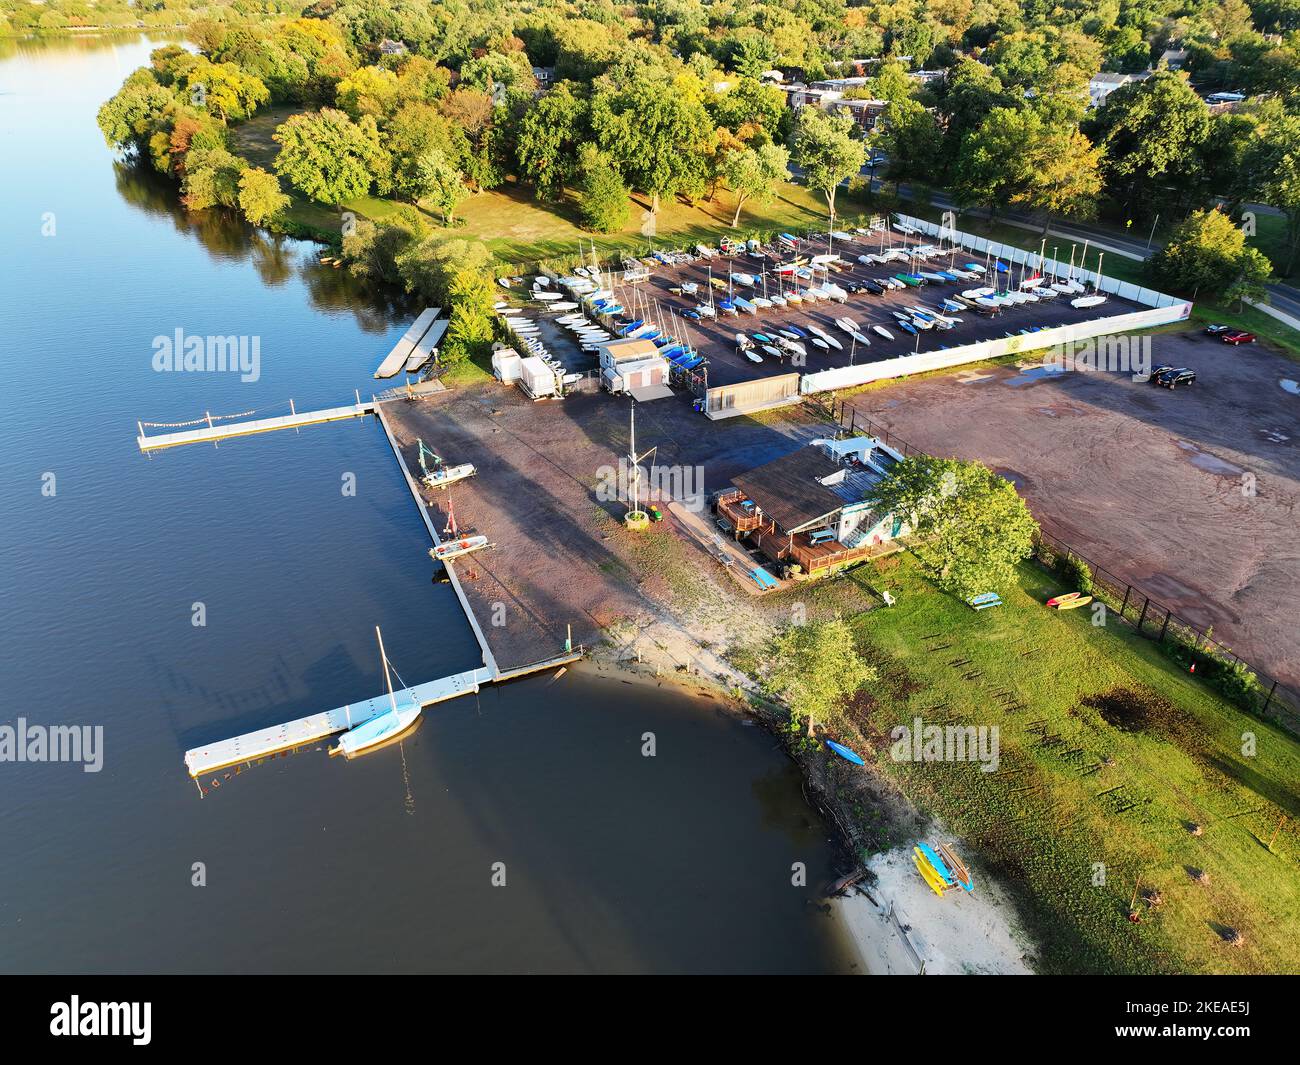 Aerial View of a Yacht Club on a River Stock Photo